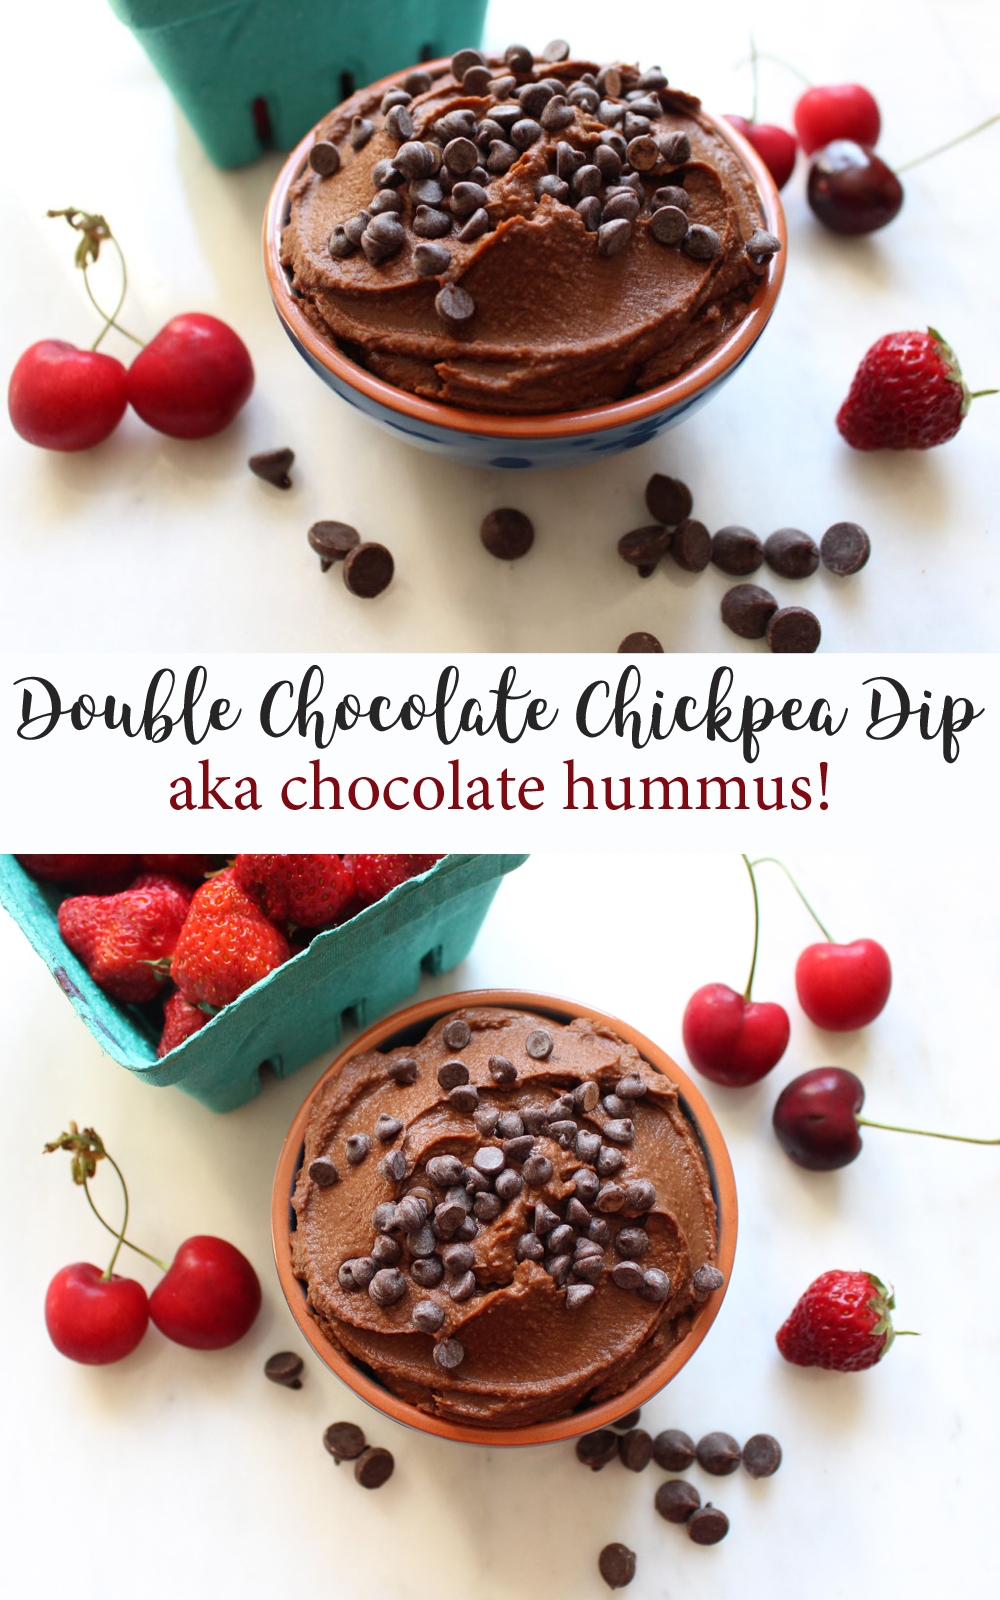 Double Chocolate Chickpea Dip (aka Chocolate Hummus) - a healthy, chocolatey dip for fruits, pretzels, graham crackers... or a spoon!